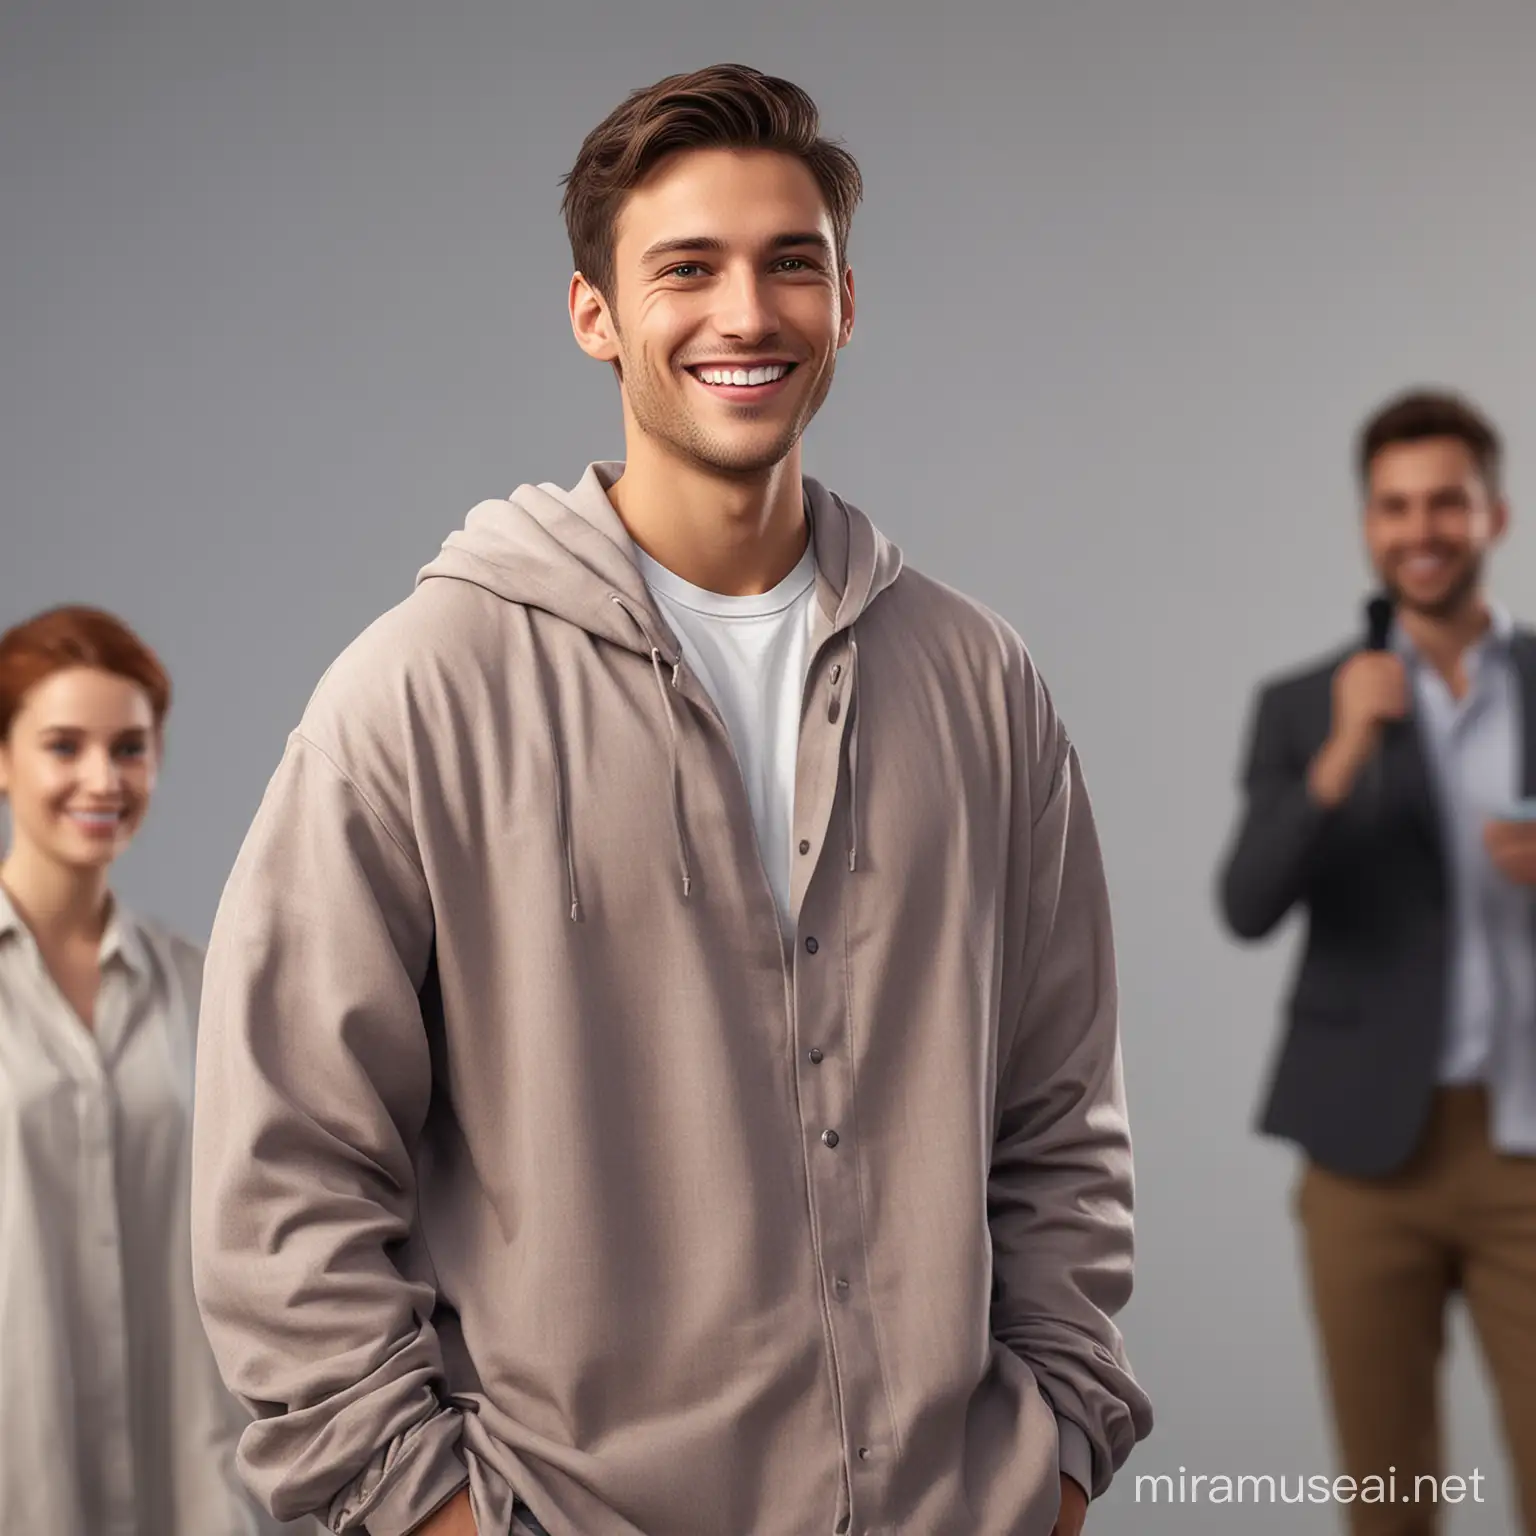 an attractive young male being interviewed on an event, wearing oversized clothes, smiling, photorealistic